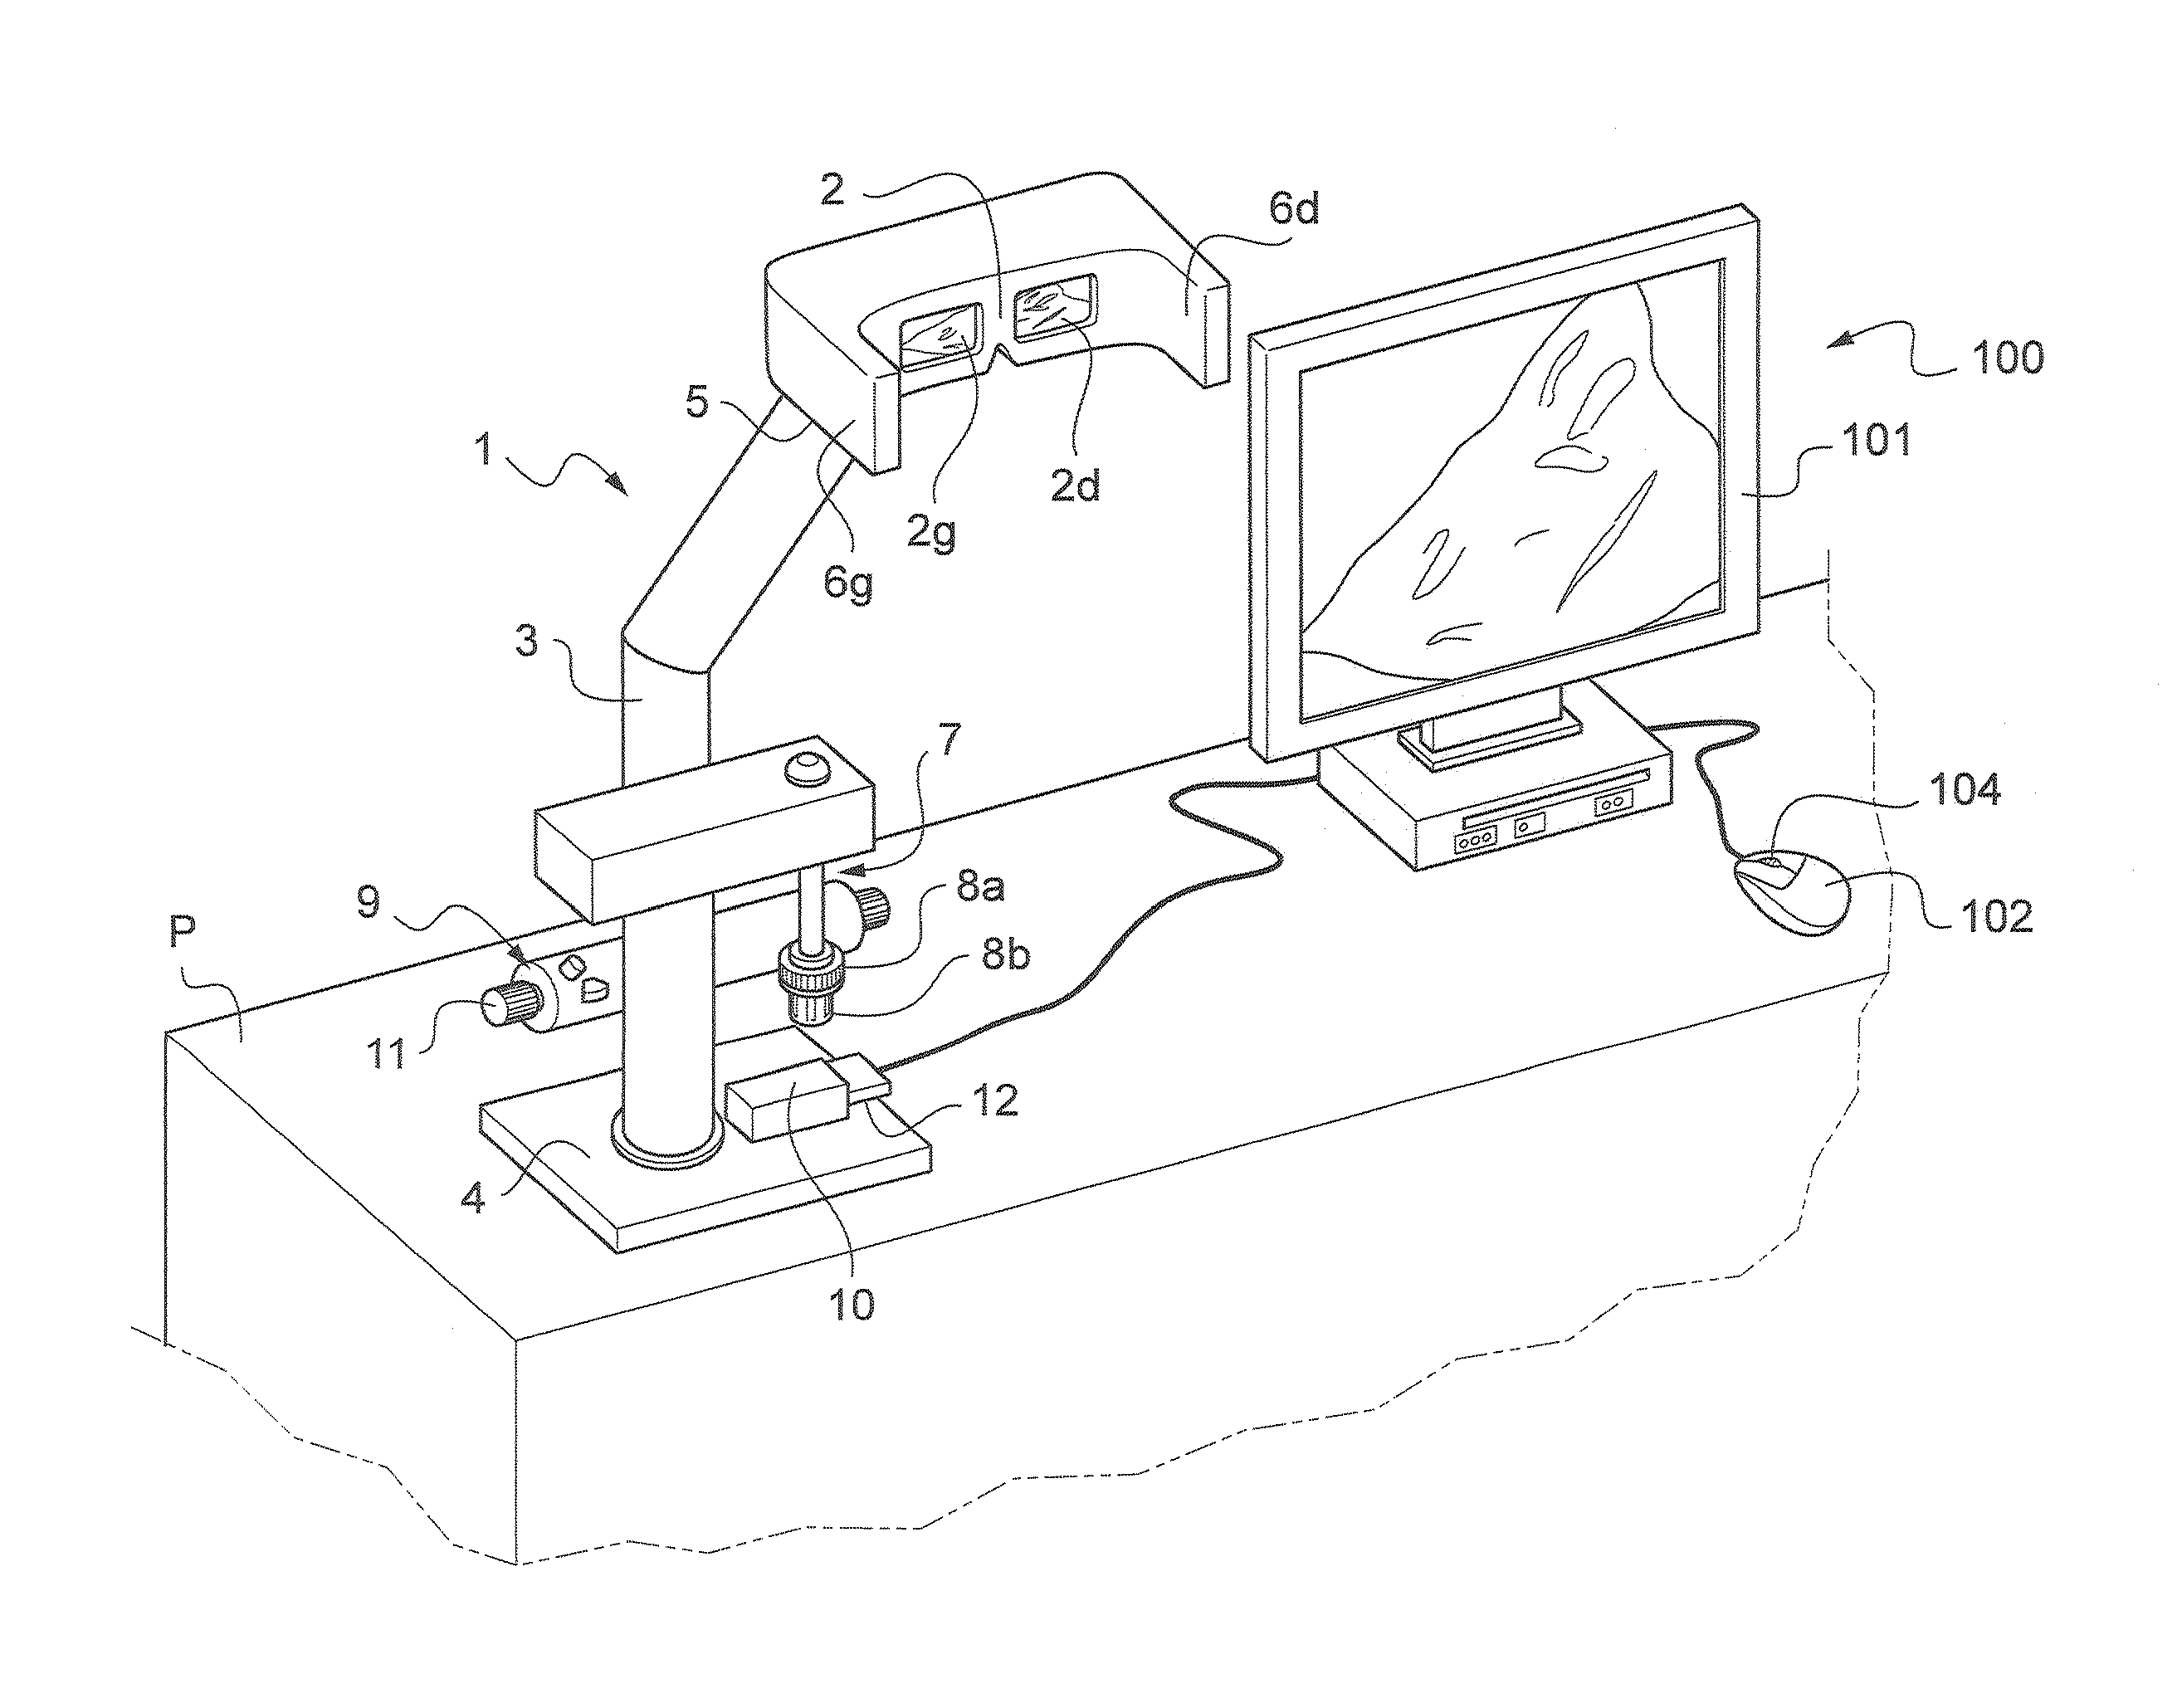 Device for viewing a digital image